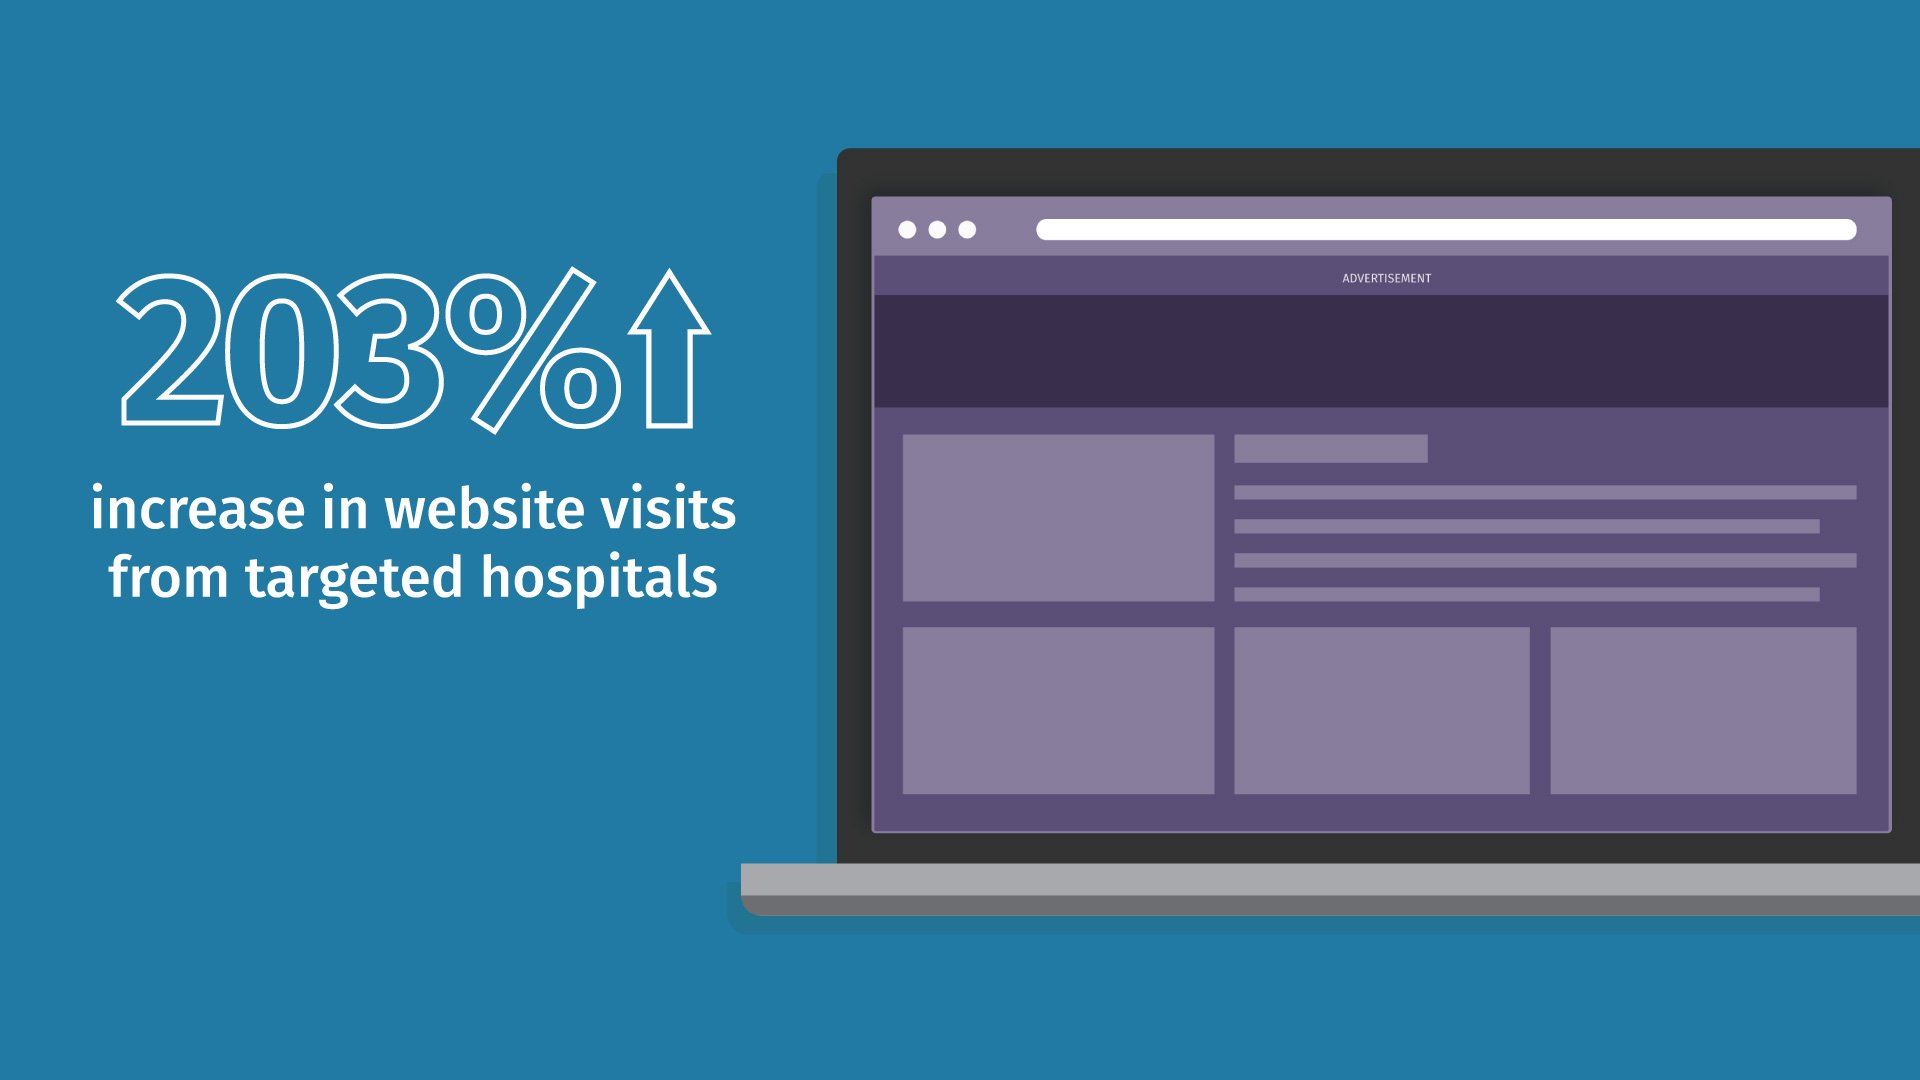 laptop illustration with text 203% increase website visits